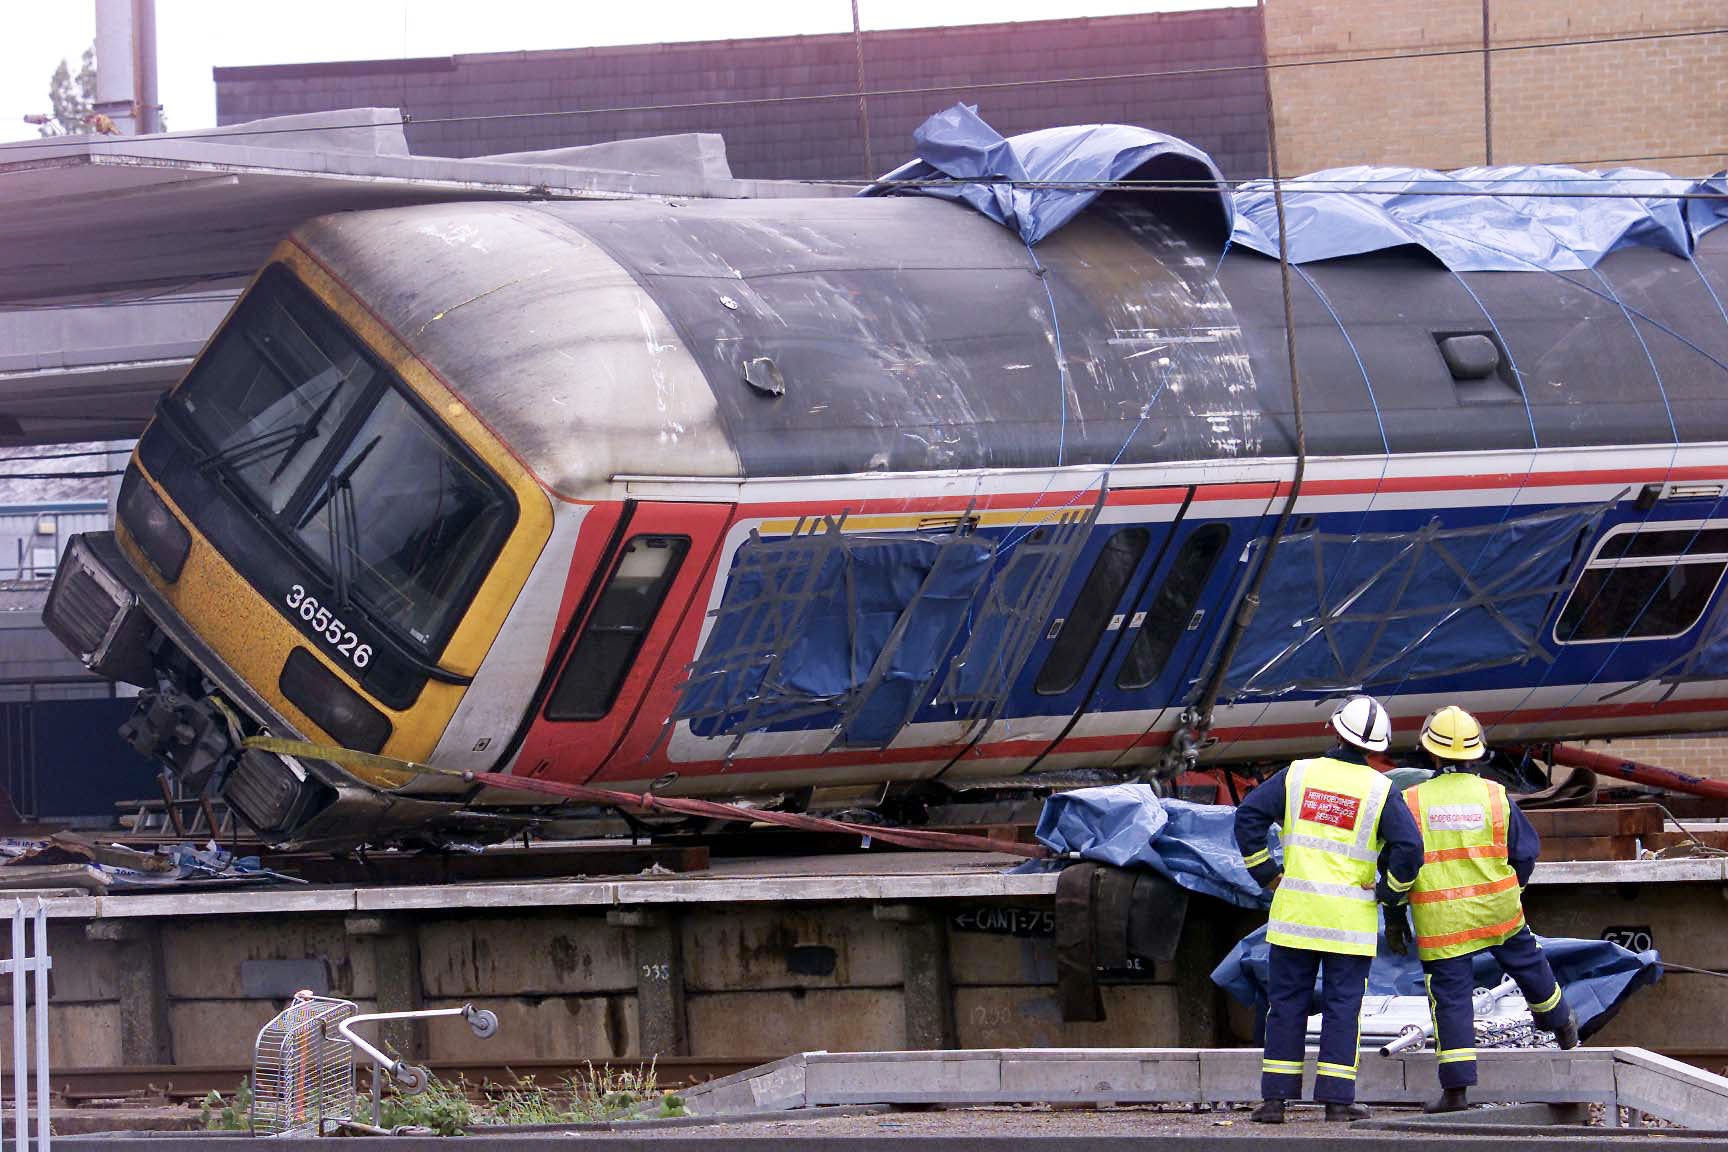 Seven people were killed in the Potters Bar train crash in May 2002 (Andrew Parsons/PA)